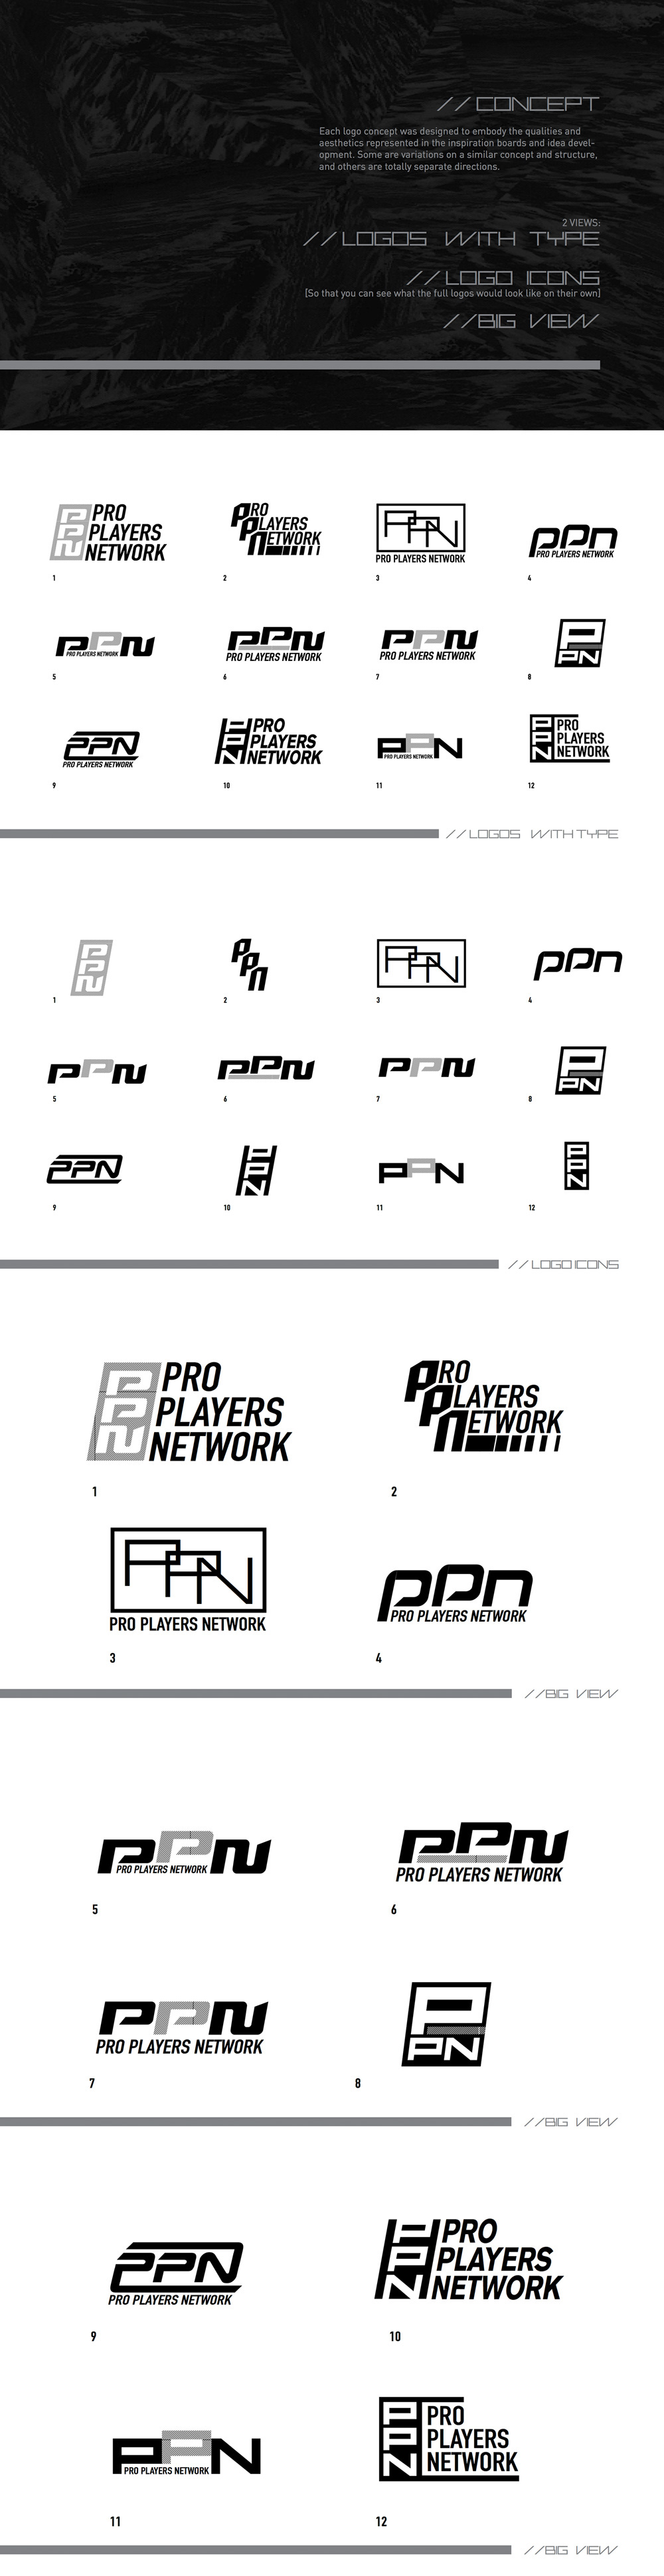 brand sports logo process guidelines thorough network pro player Cable television Nathanael Clanton Sports Branding